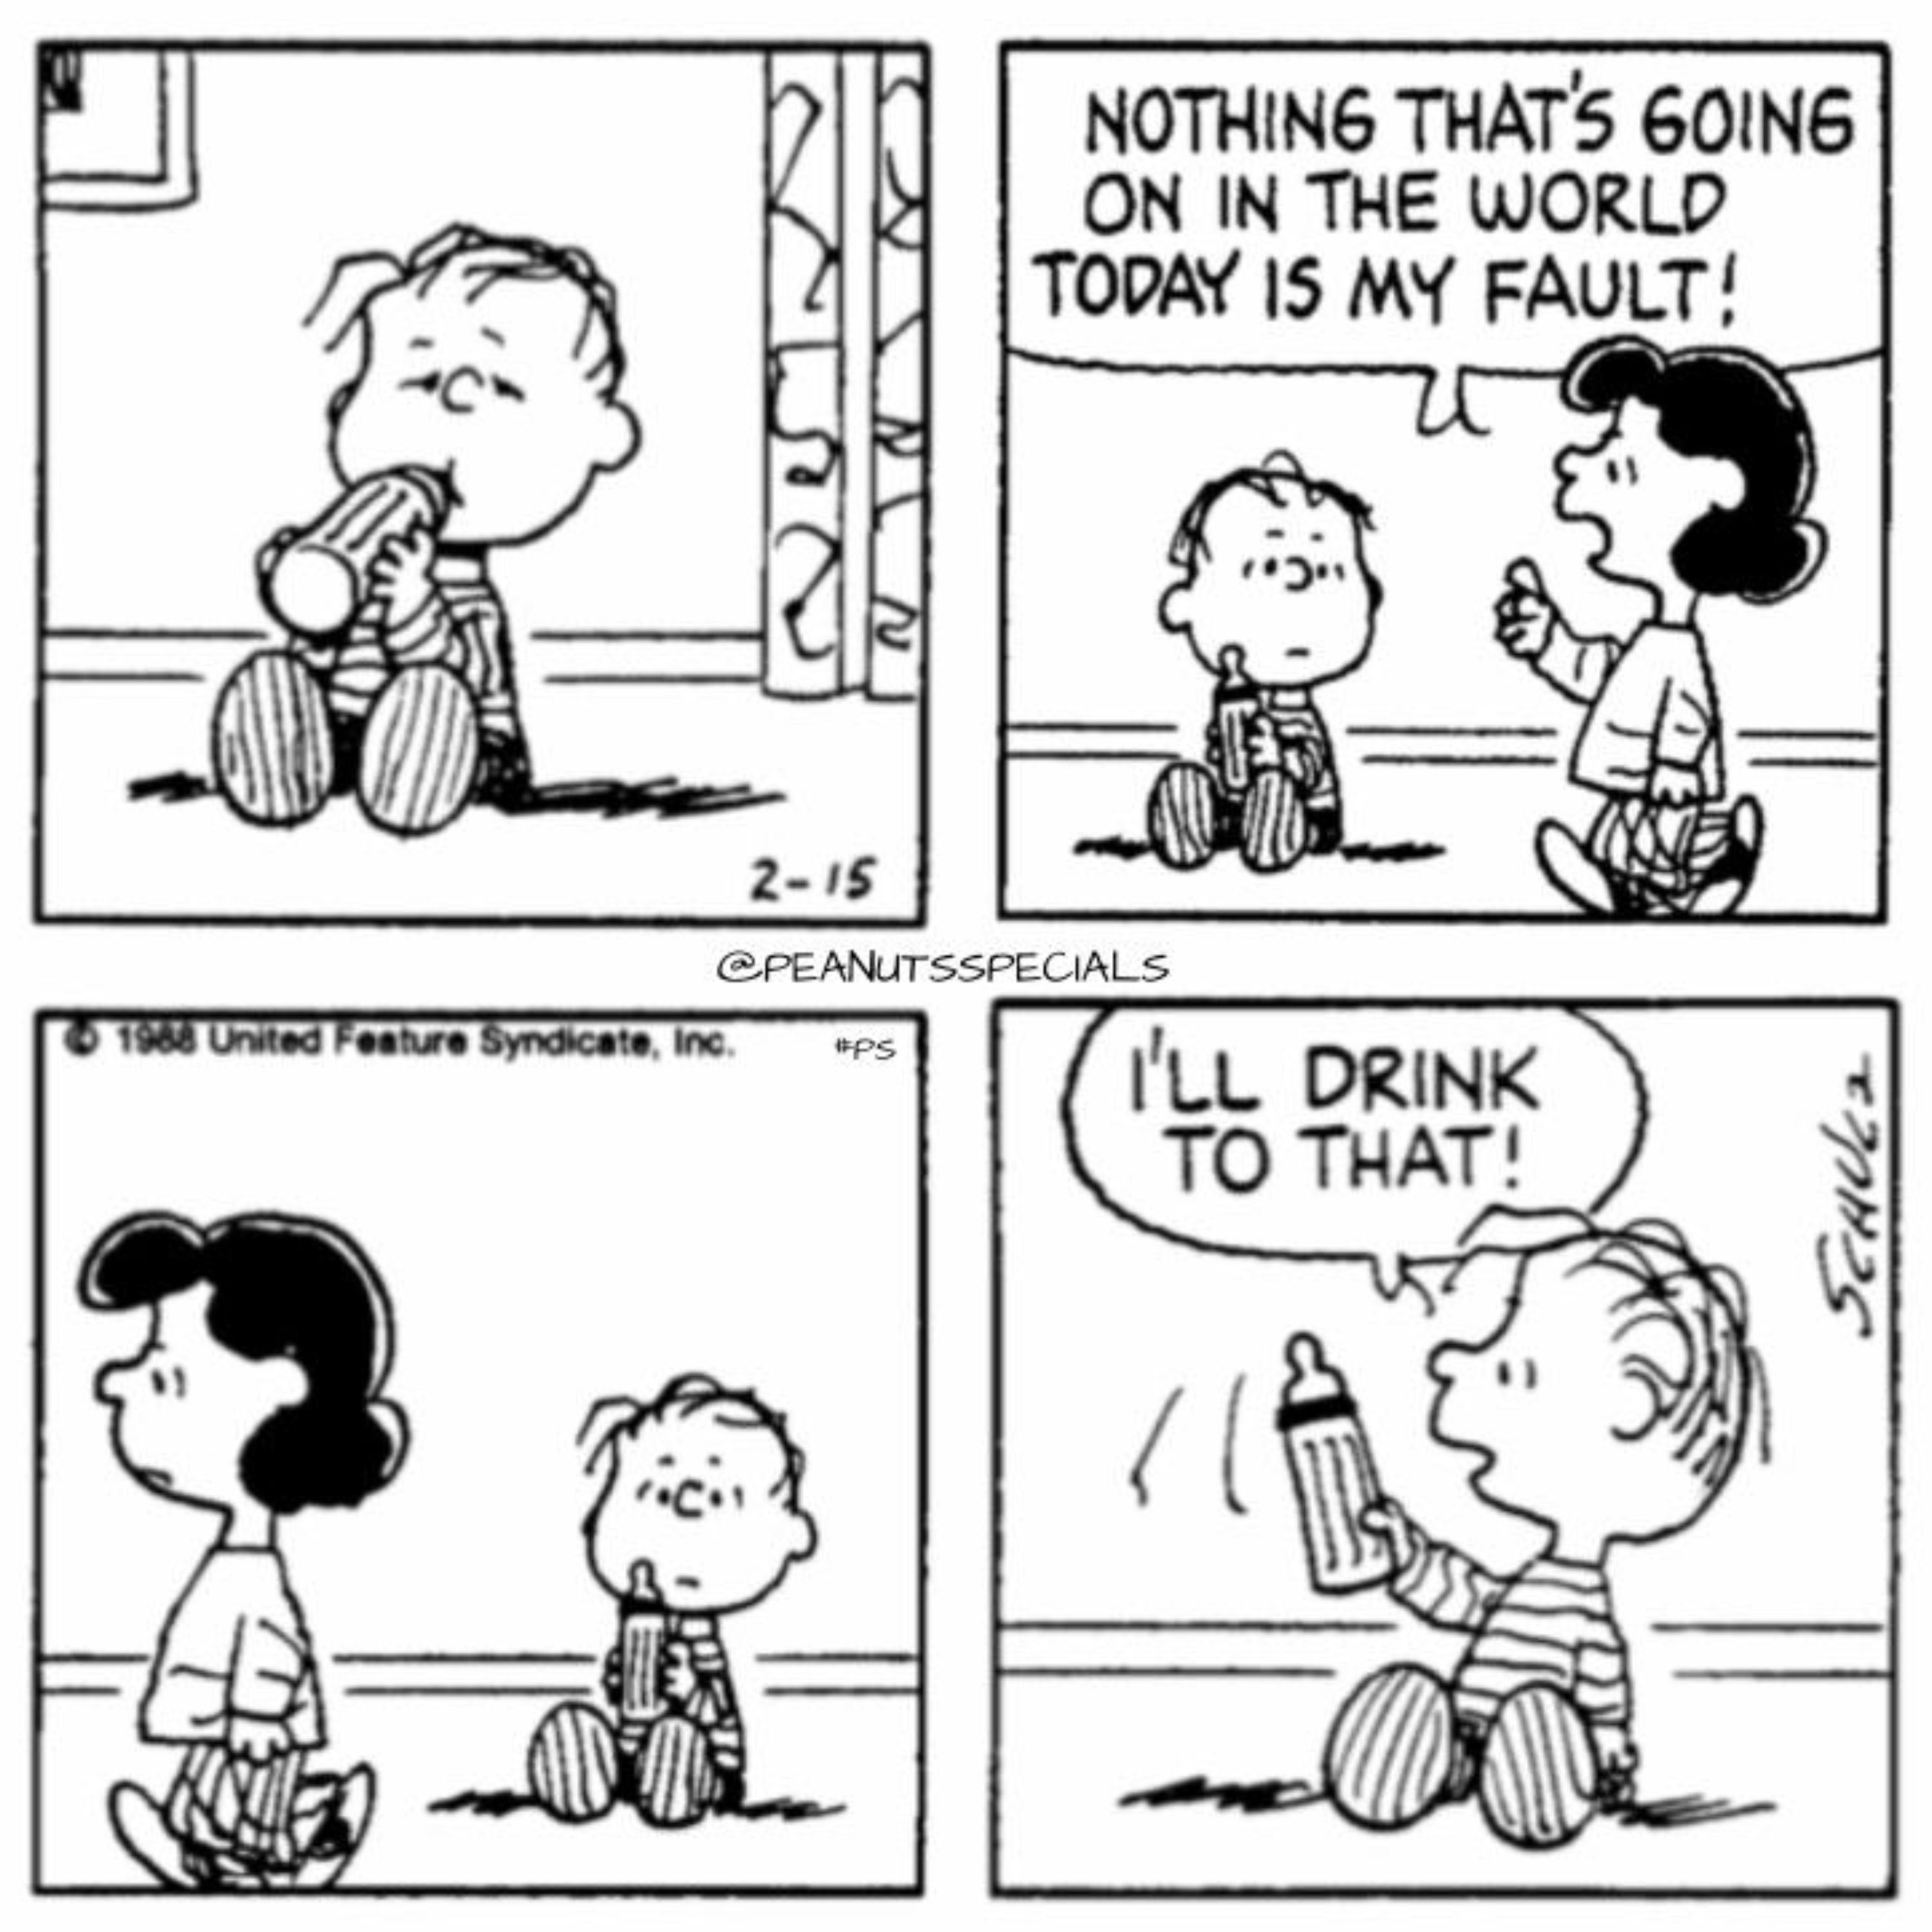 Rerun and Lucy in Peanuts.